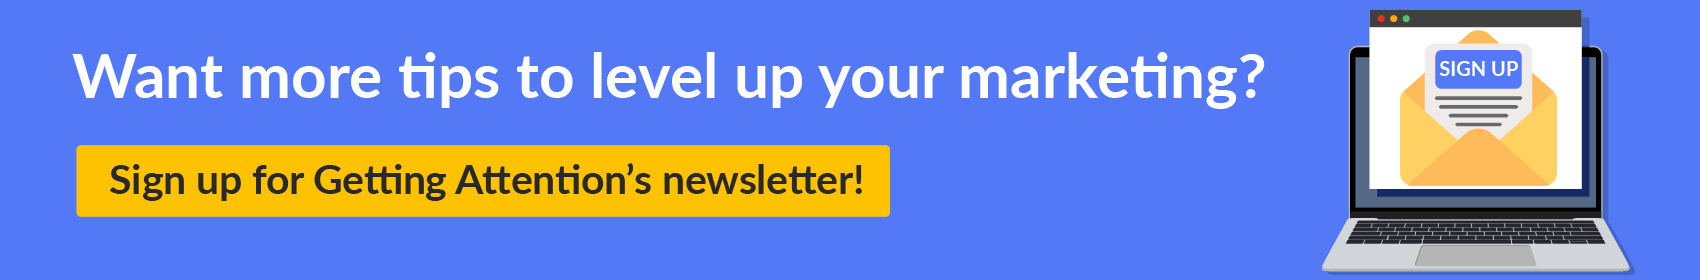 Sign up for Getting Attention’s newsletter to level up your marketing and recruit more supporters for your cause.